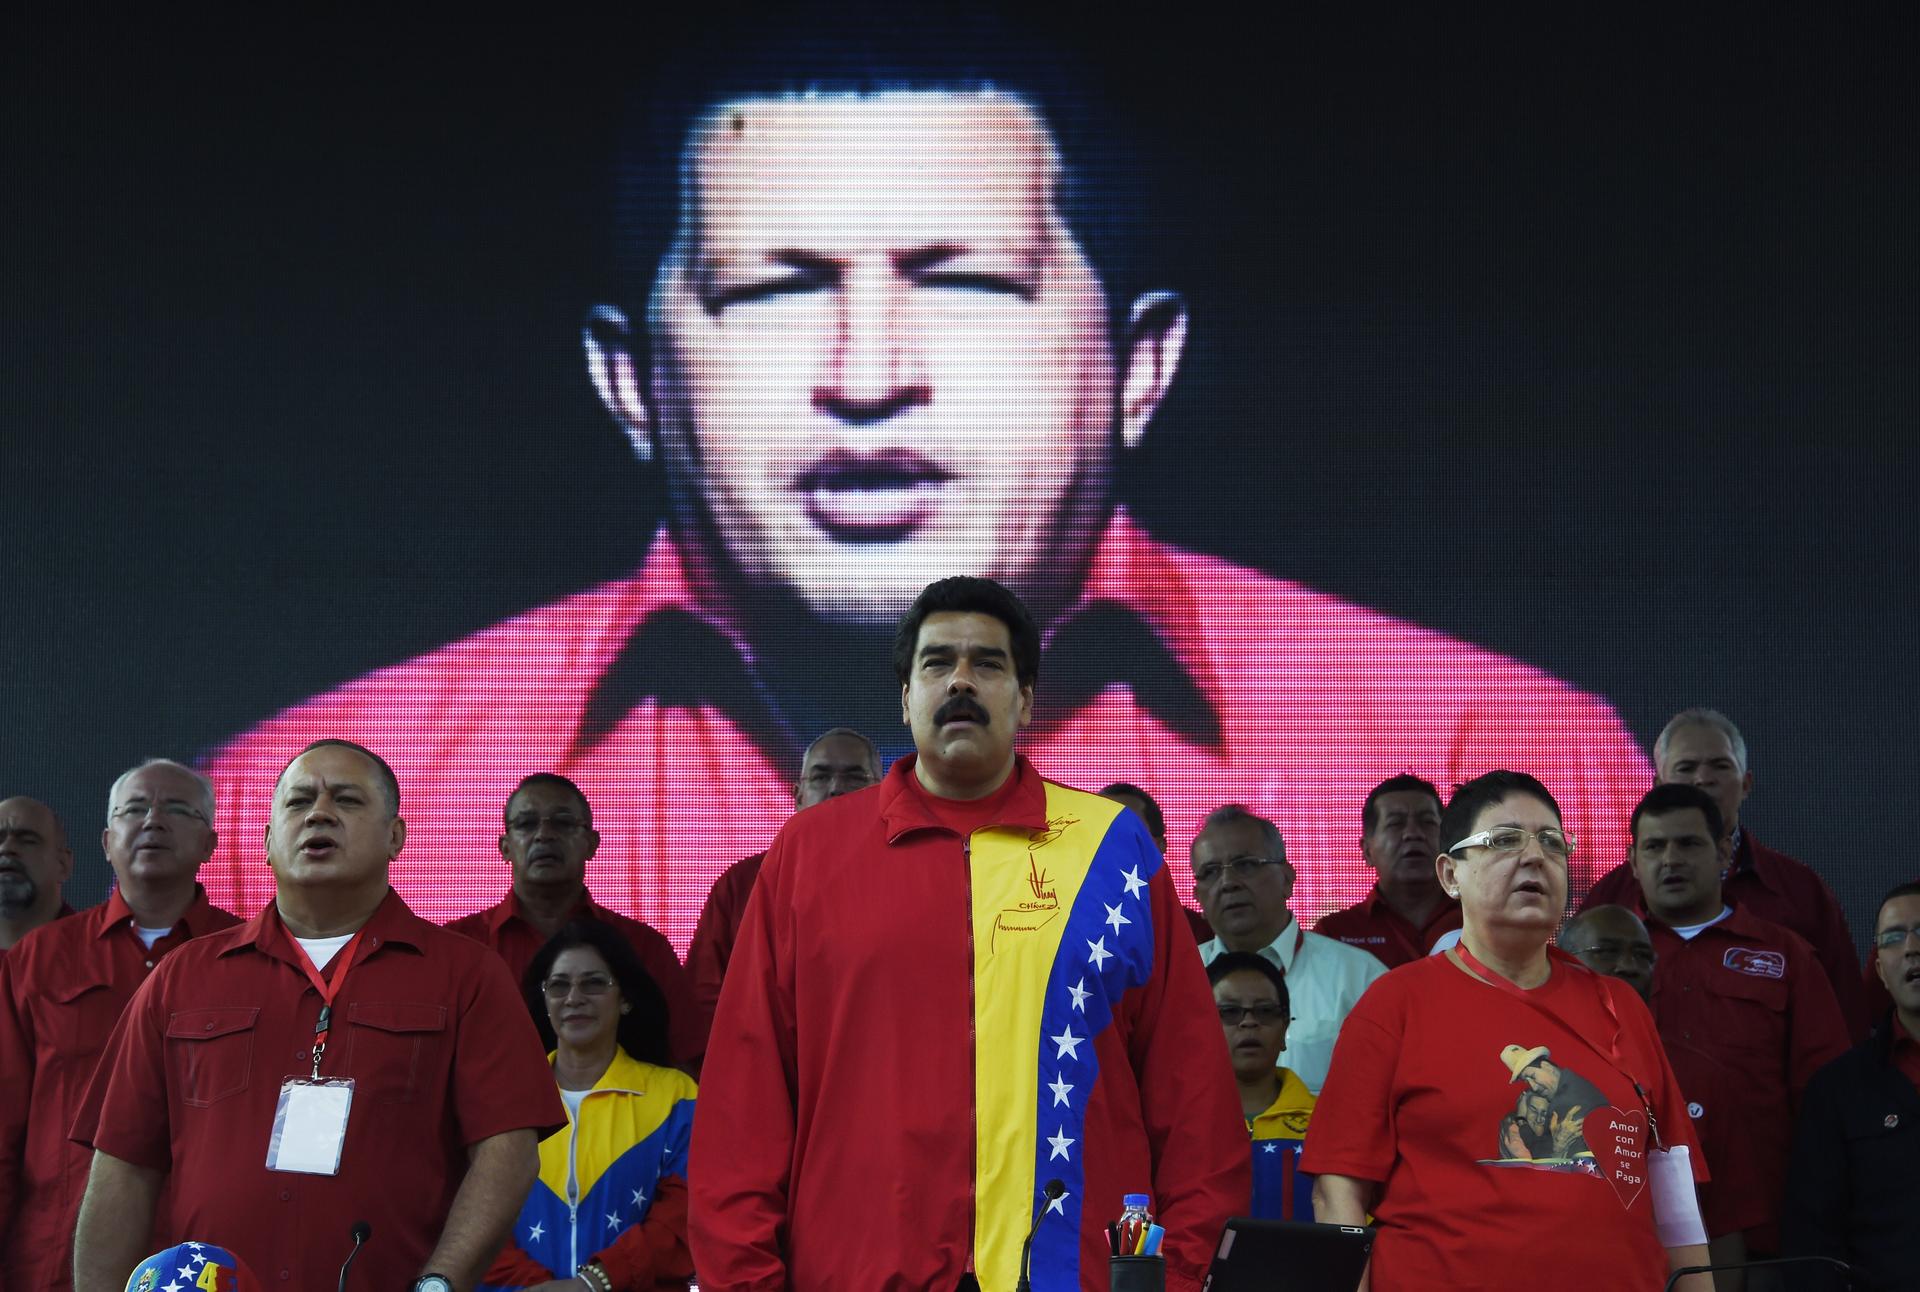 Venezuelan President Nicolas Maduro is seen standing among other guests and authorities.